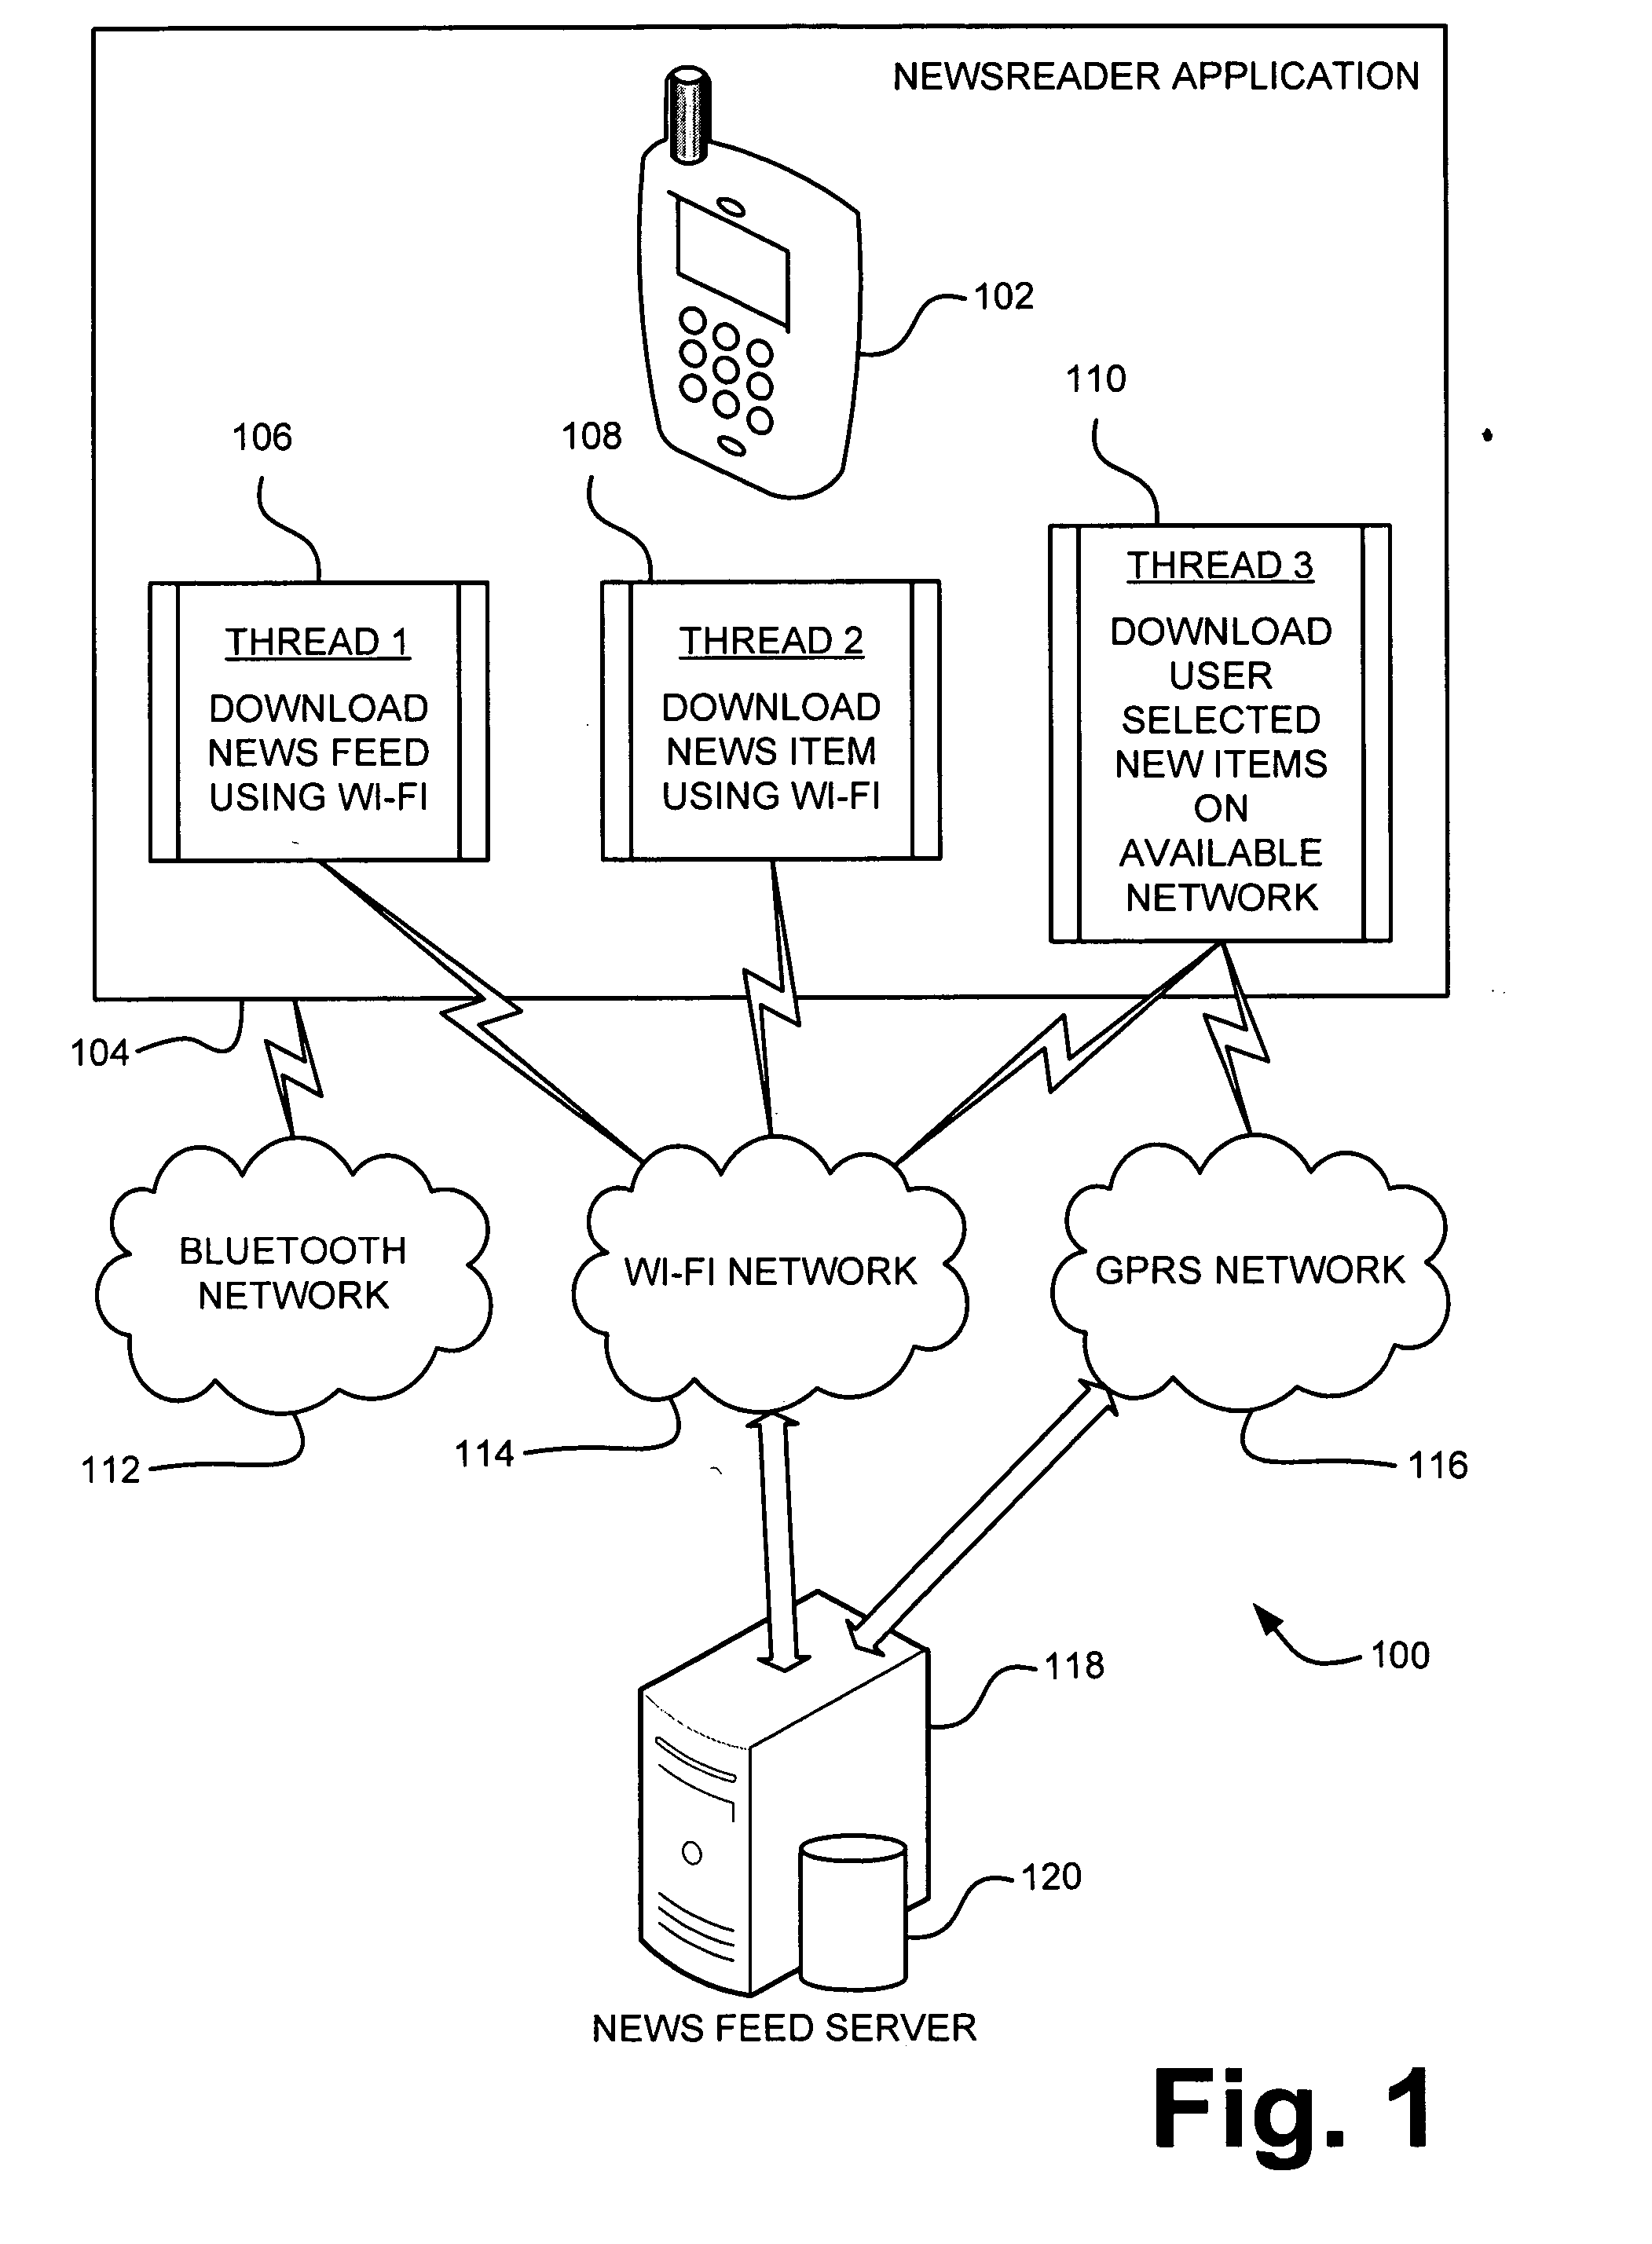 Network interface routing using computational context